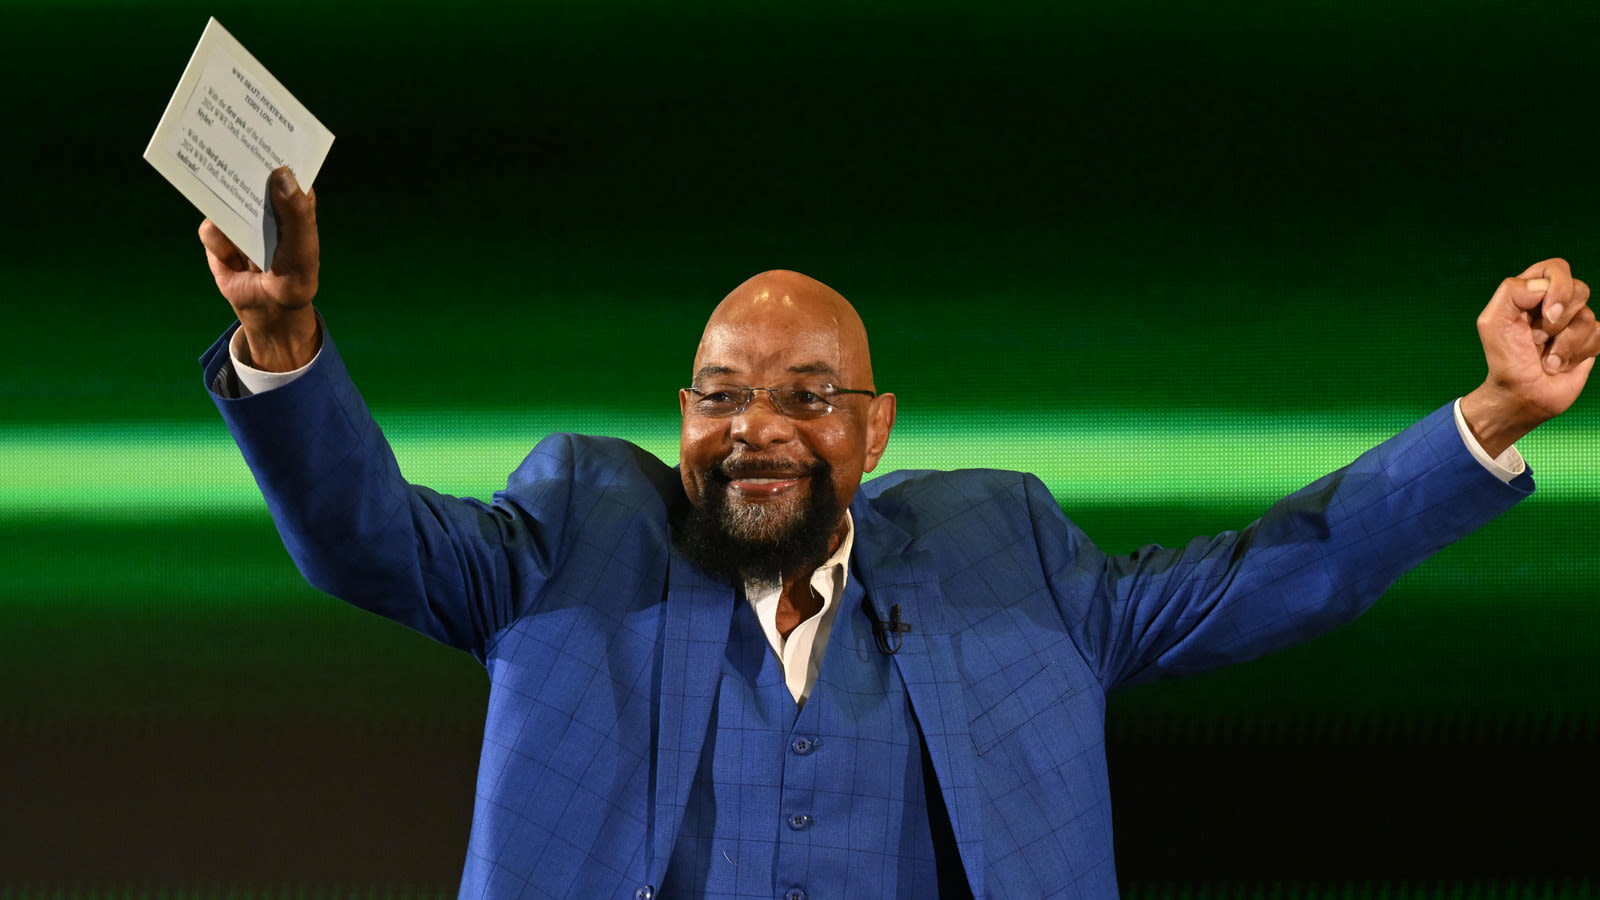 Teddy Long Reacts To AEW's Focus On Swerve Strickland Being First Black Champion - Wrestling Inc.